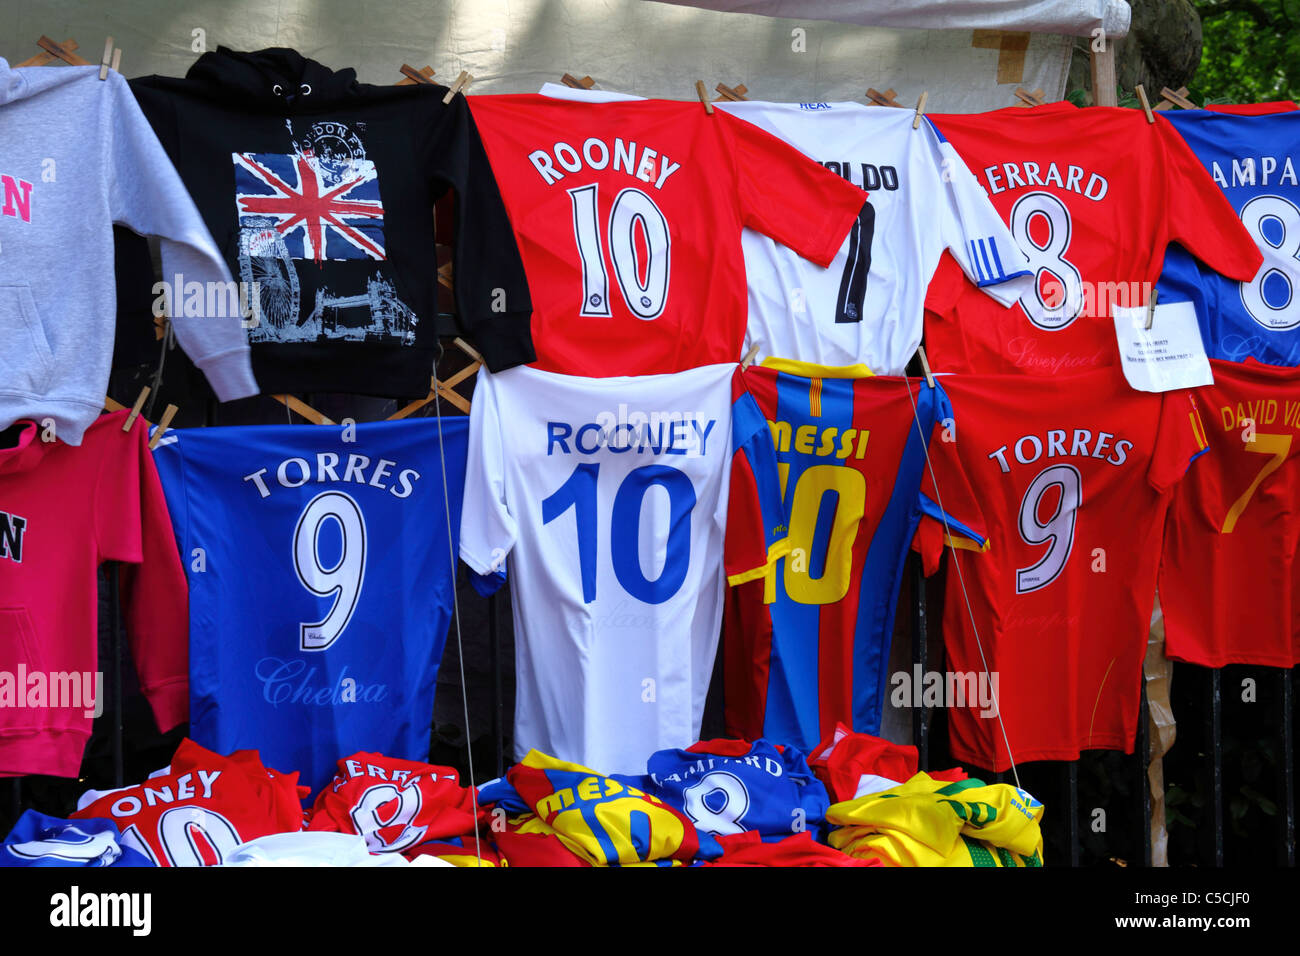 London sweatshirts and football shirts for sale alongside Green Park, Piccadilly, London, England Stock Photo